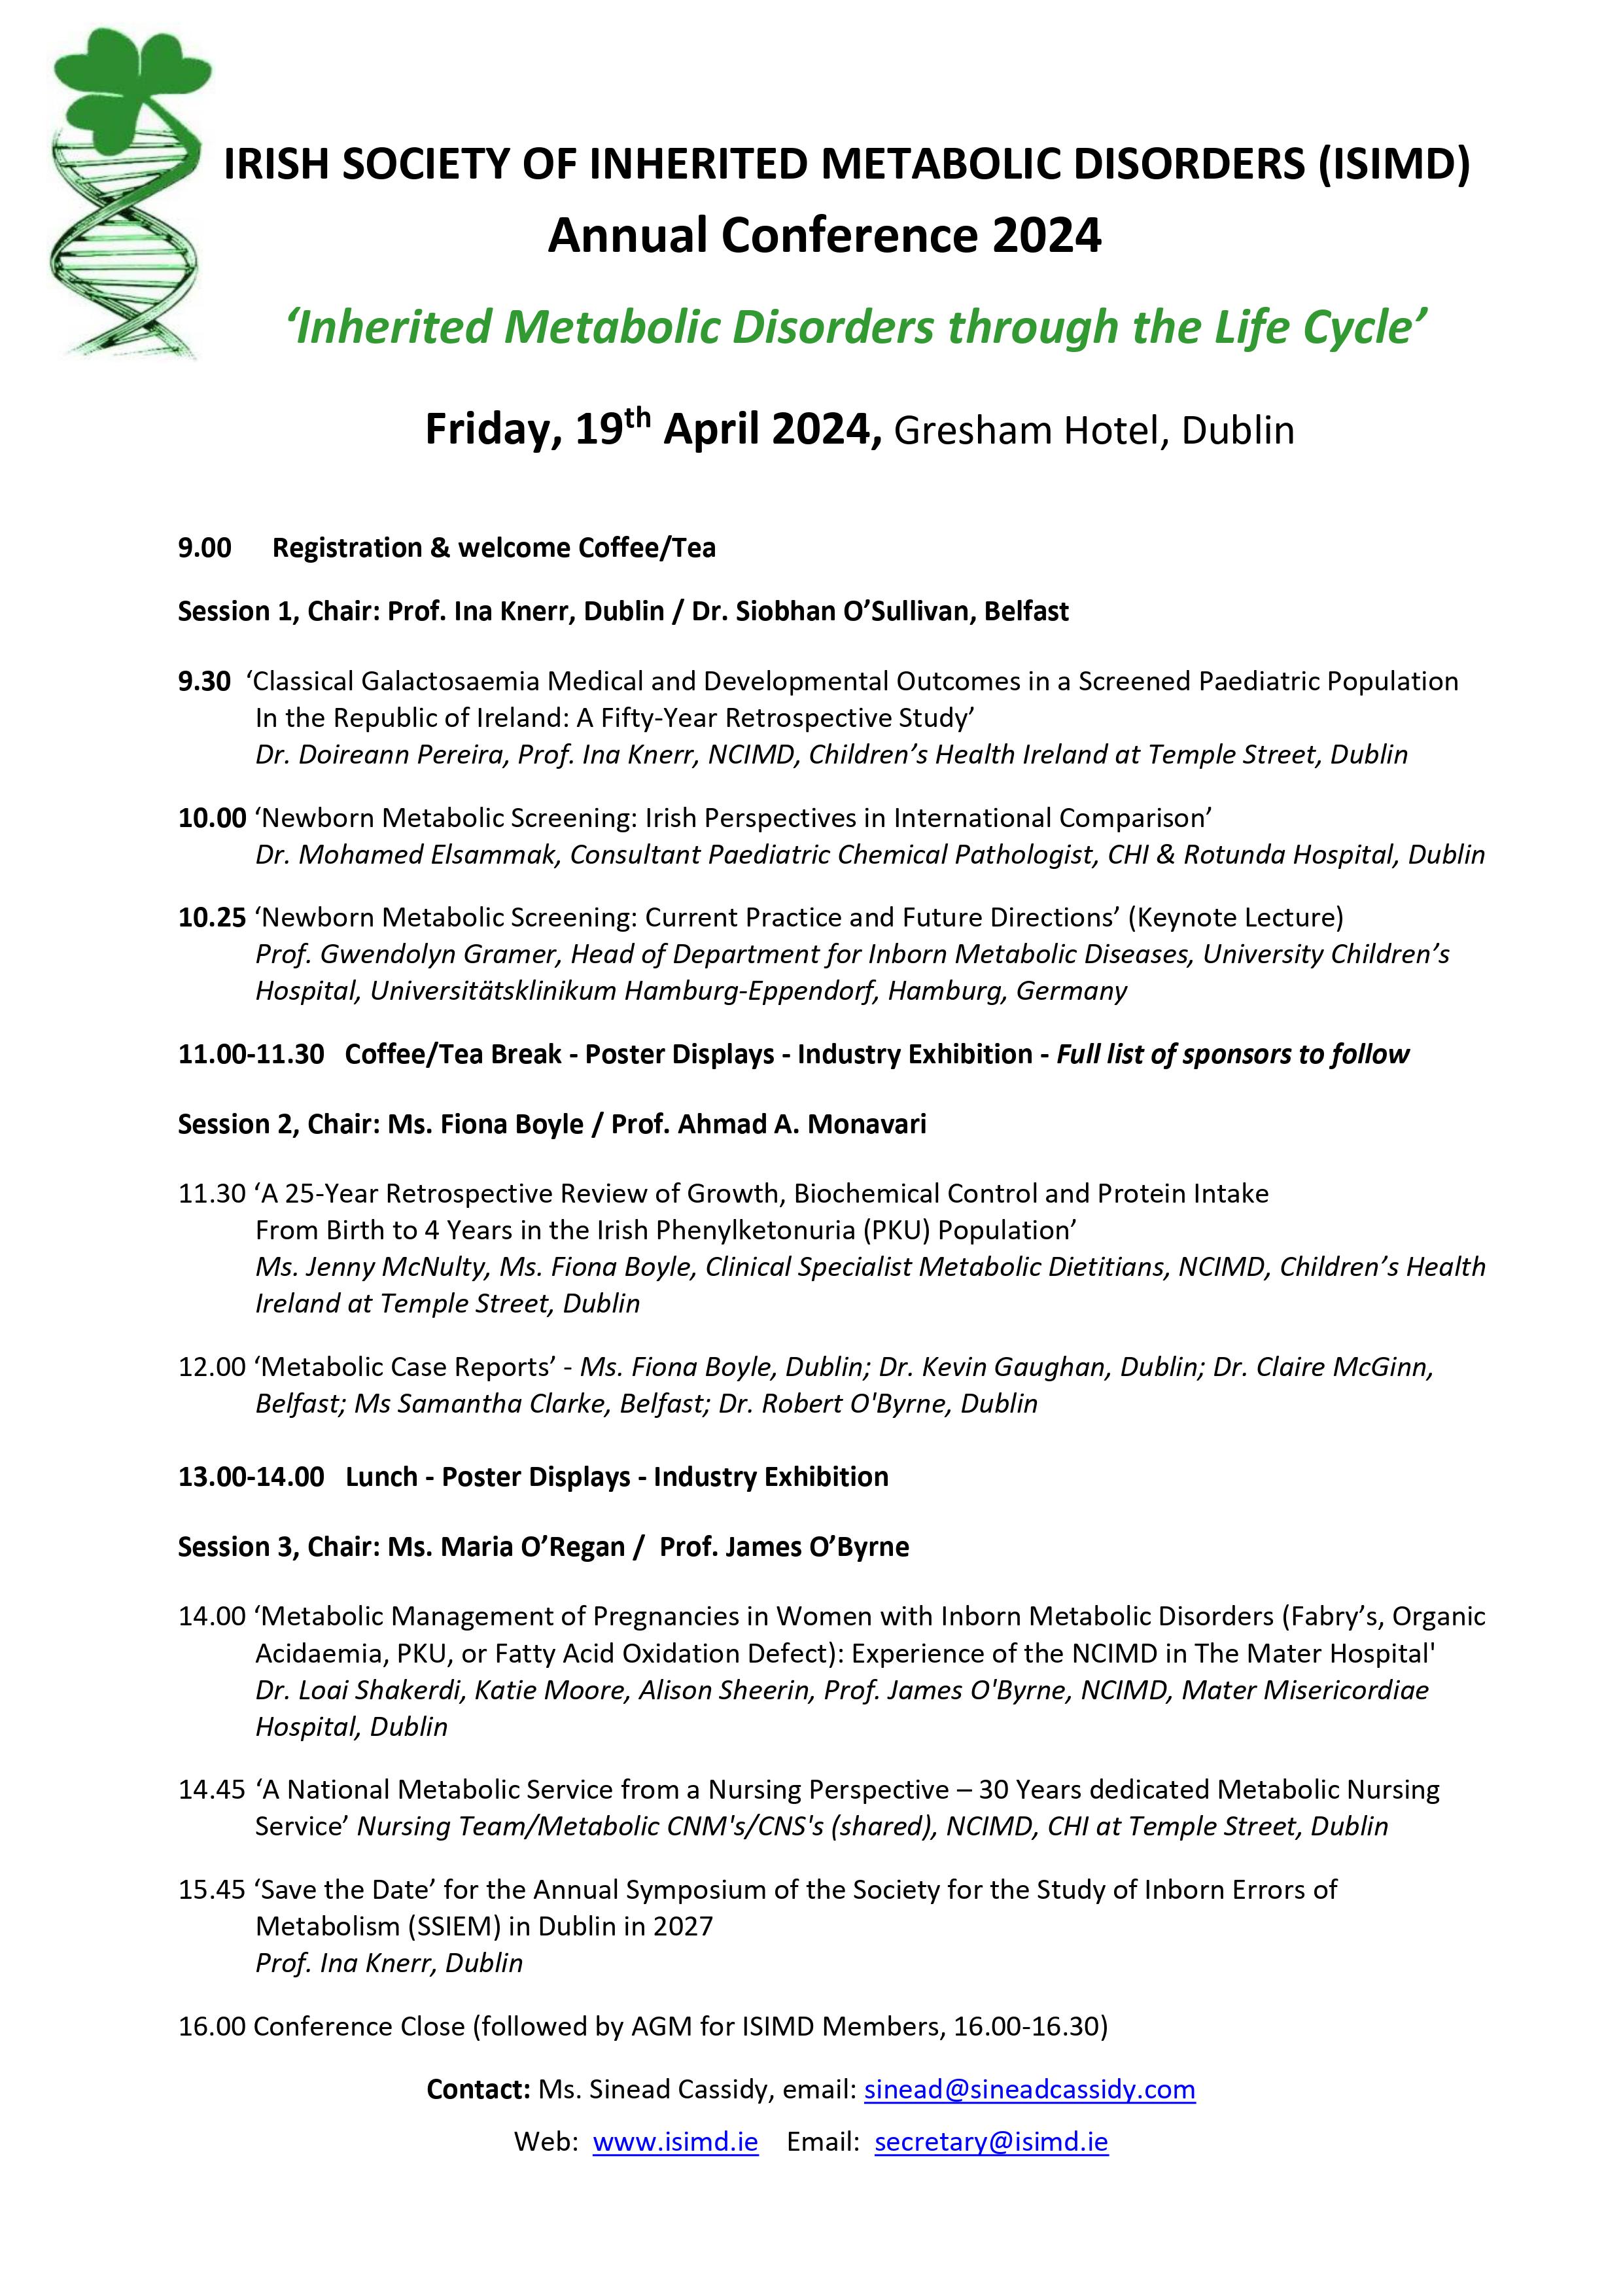 ISIMD Conference Programme 2024